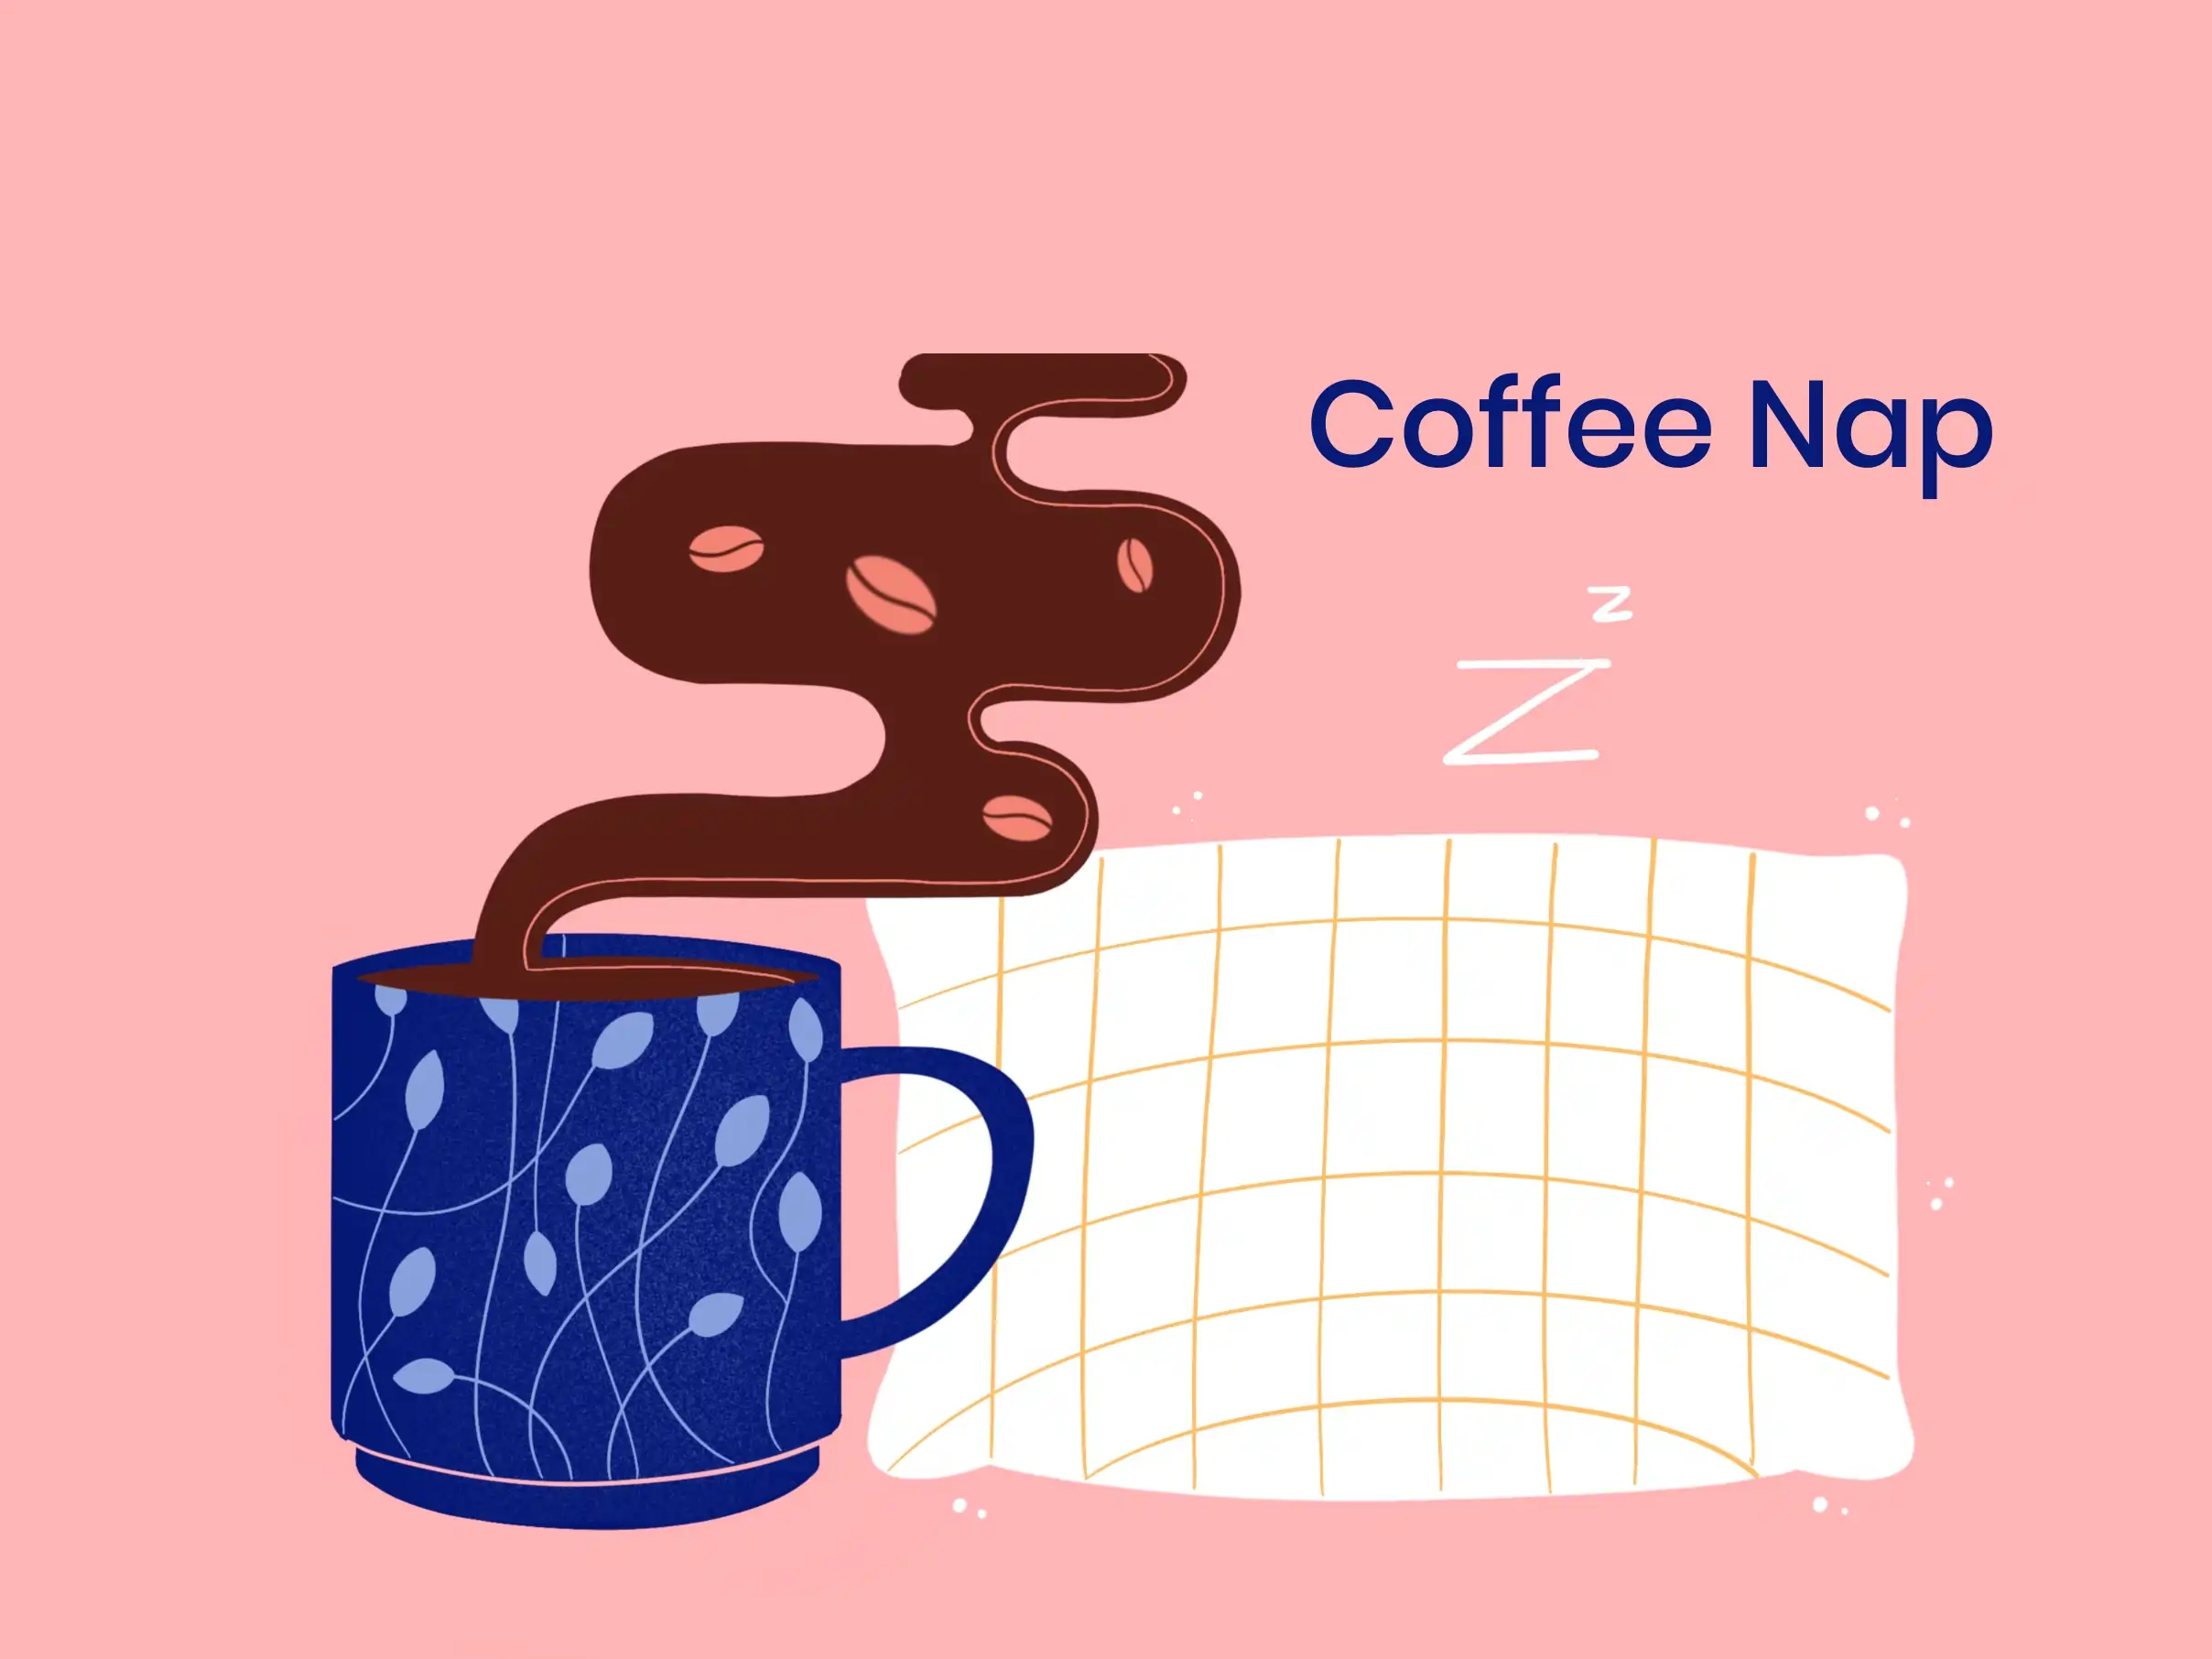 During this brief period of sleep, the caffeine molecules are competing with adenosine, a neurotransmitter that promotes sleep and relaxation, for receptors in the brain. As a result, when we wake up, we not only feel refreshed from the nap, but we also experience the stimulating effects of the caffeine, leading to a double boost of energy.